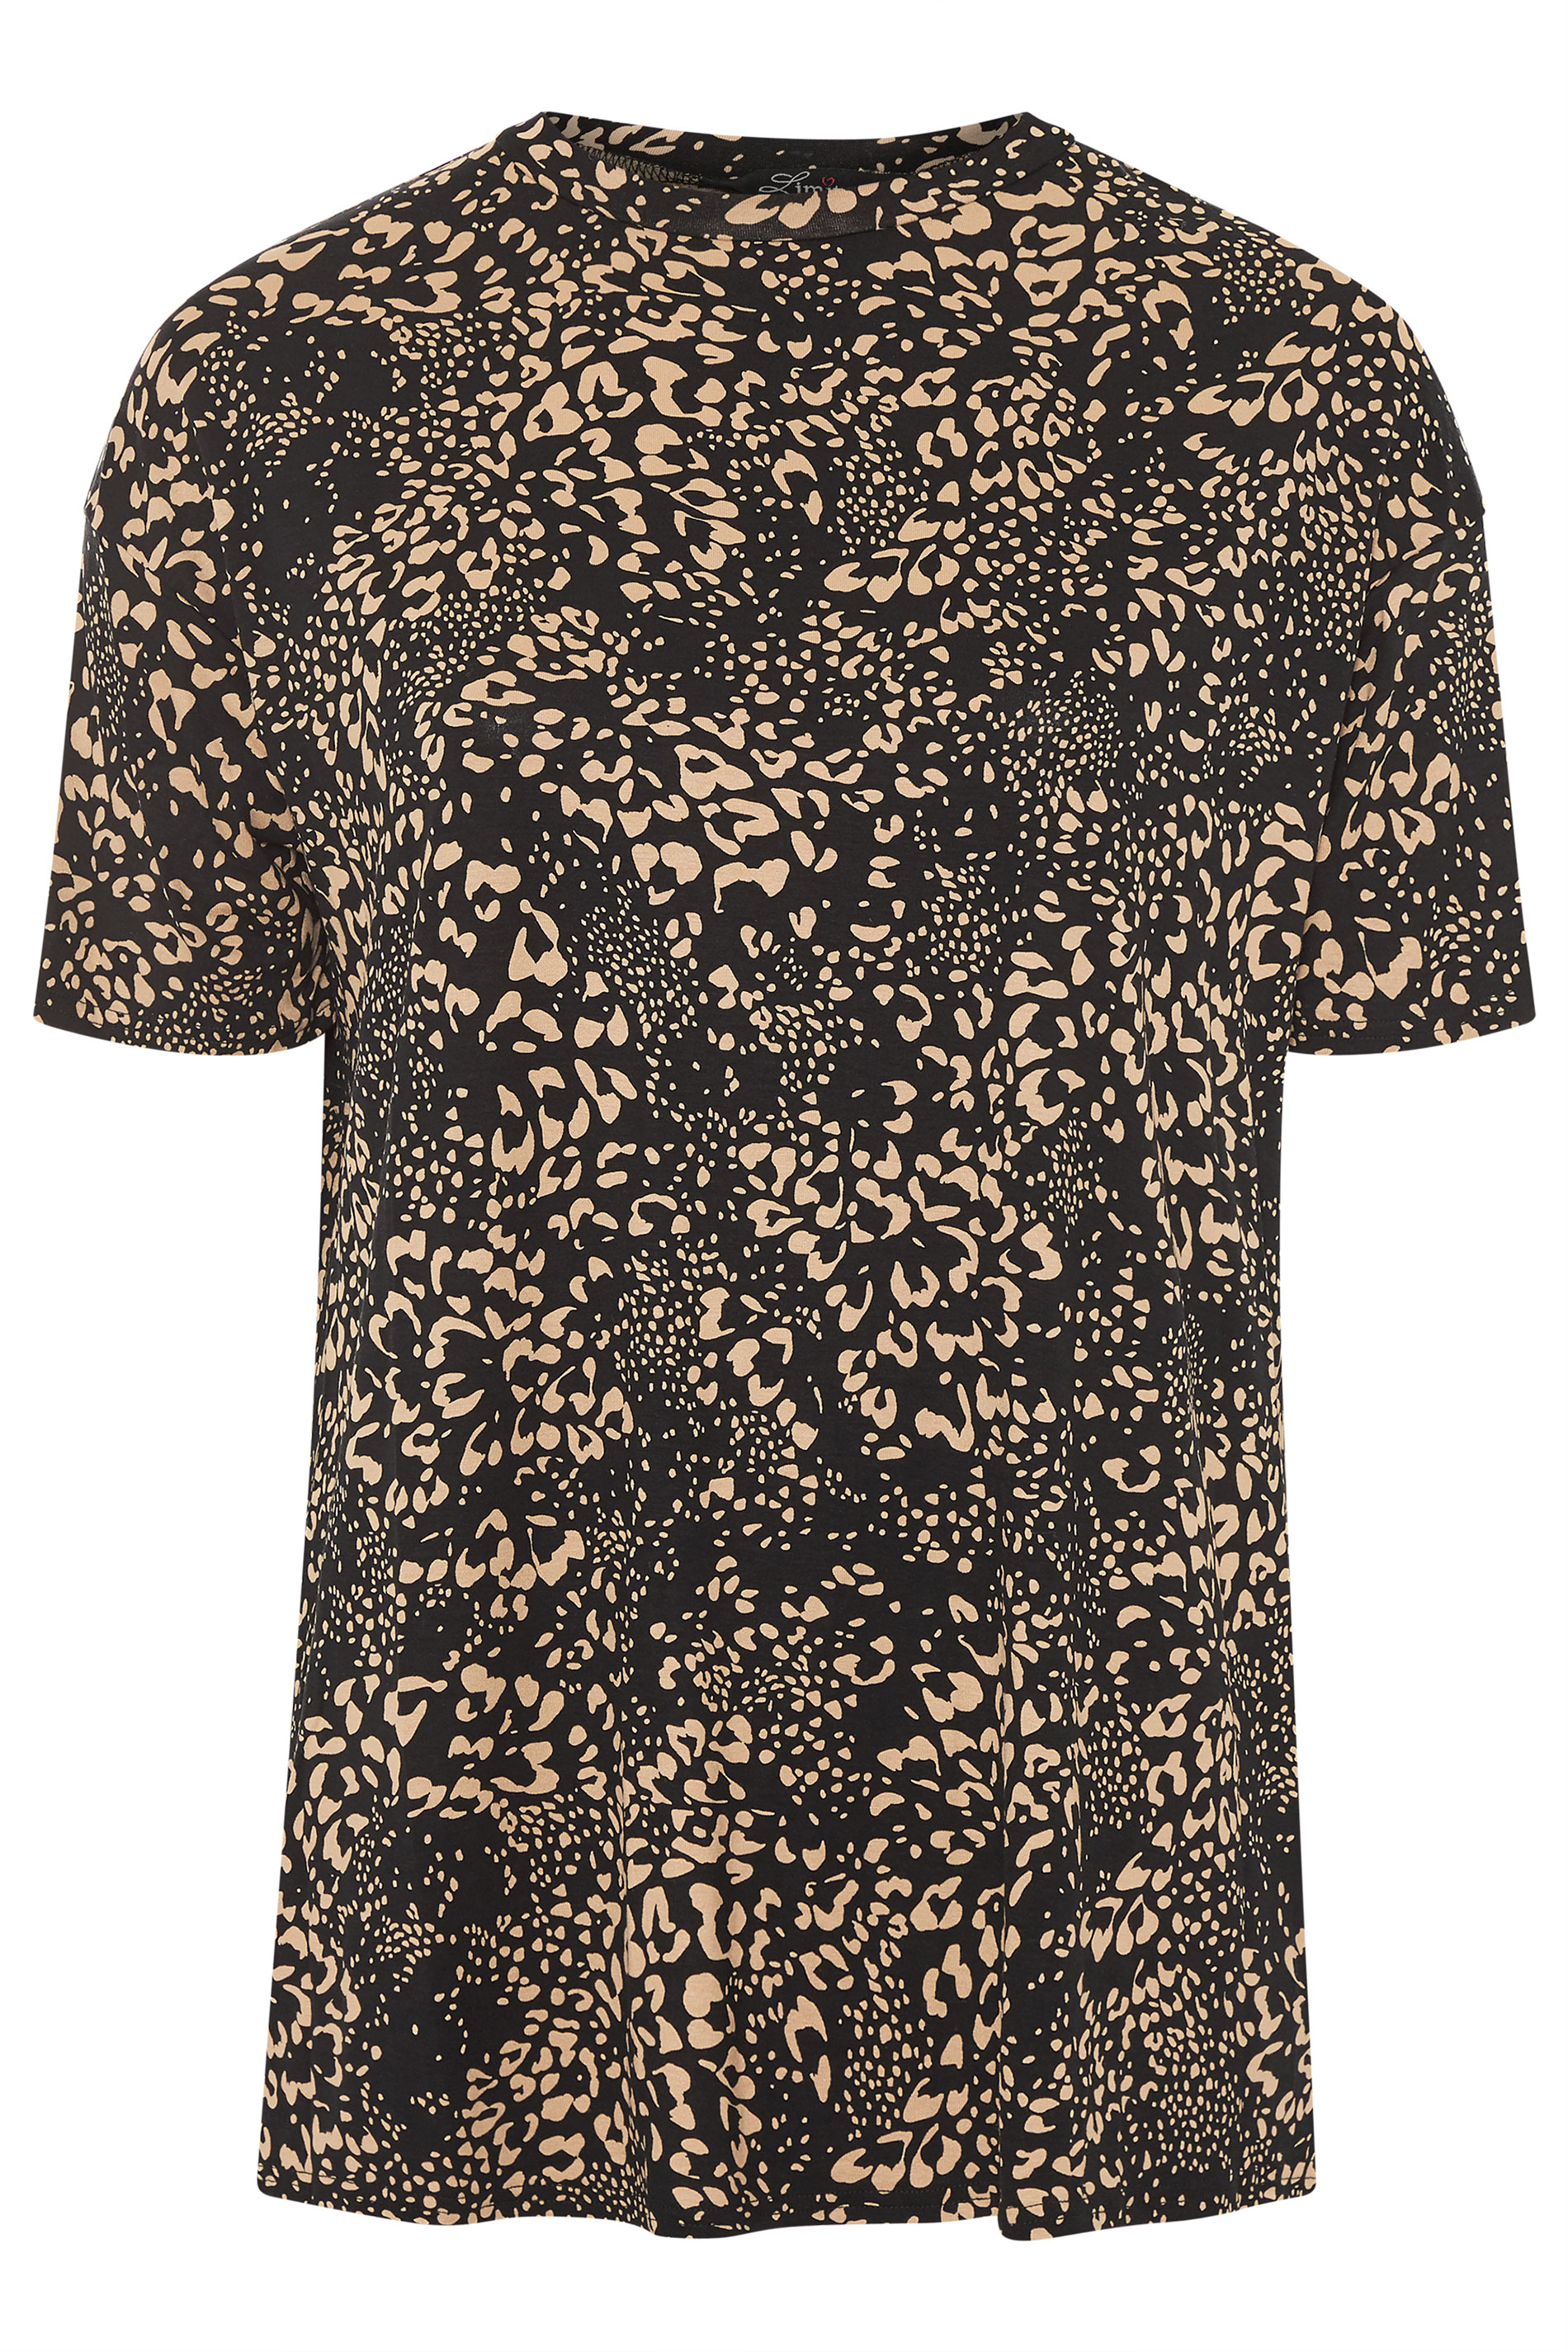 LIMITED COLLECTION Black Leopard Print Oversized Top | Yours Clothing